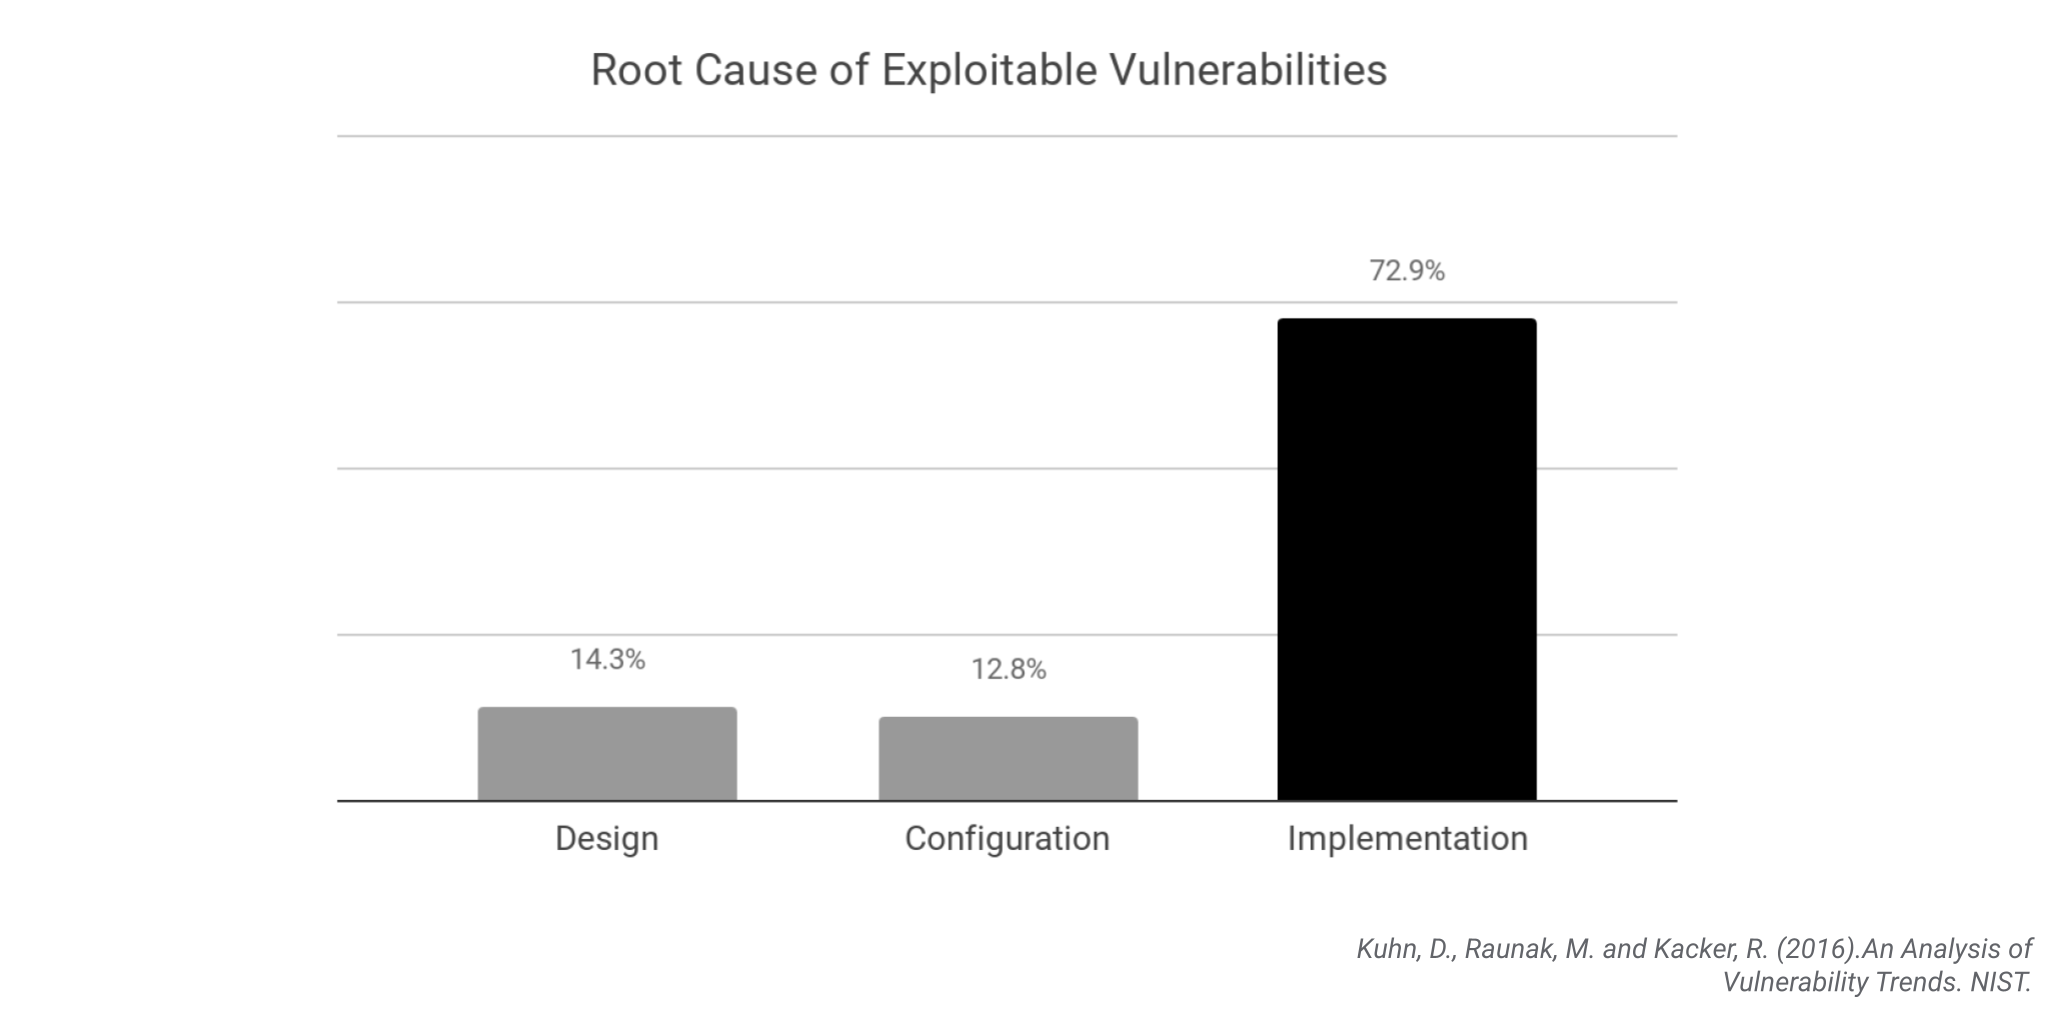 Barchart of the root causes of software vulnerabilities. Data from NIST&rsquo;s &ldquo;An Analysis of Vulnerability Trends&rdquo;, 2016